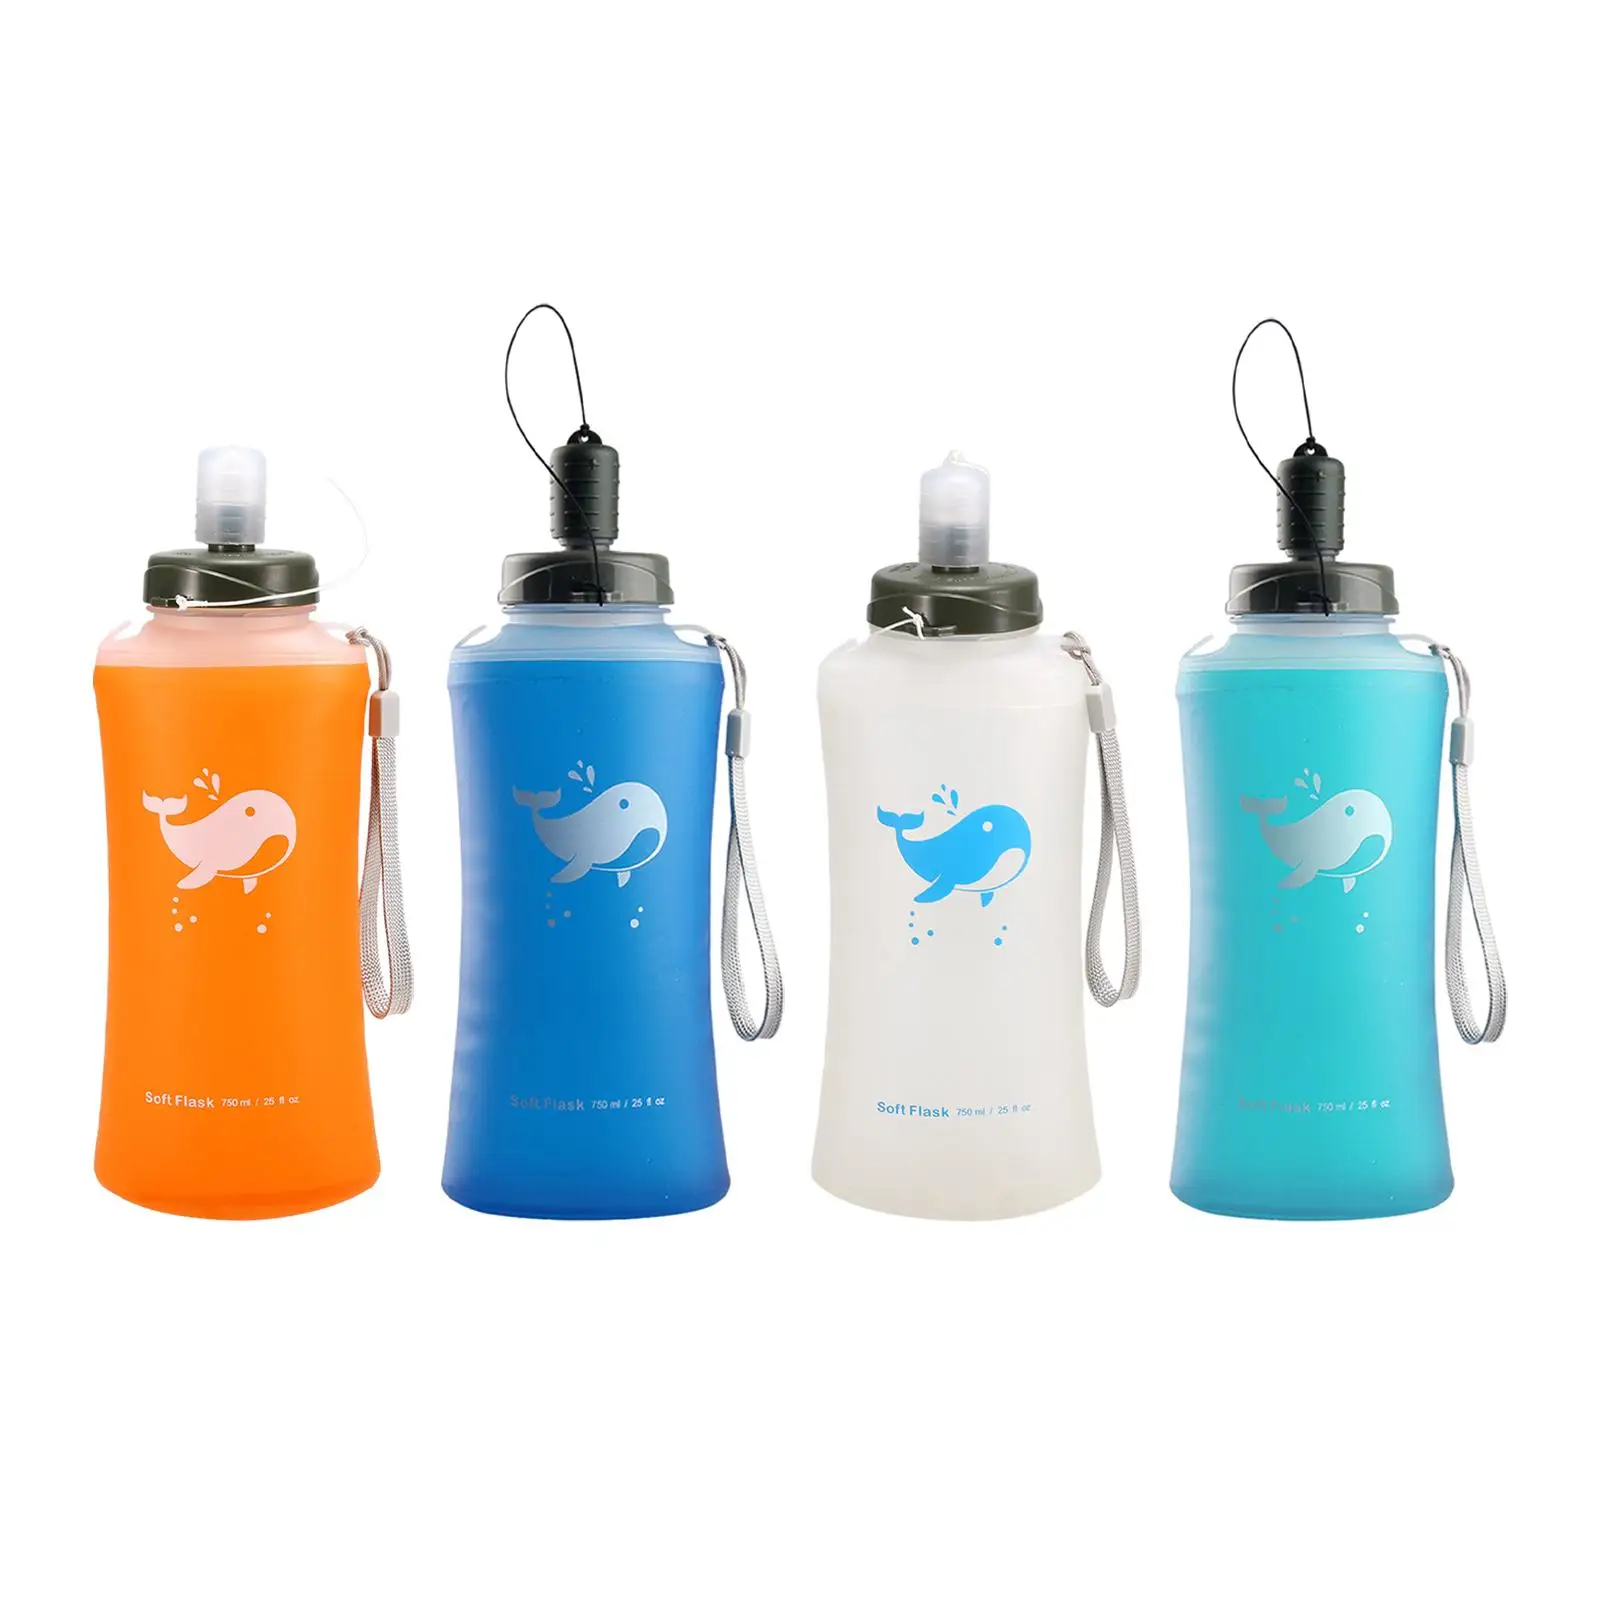 Collapsible Water Bottle Folding Durable Soft Flask for Running Outdoor Bike